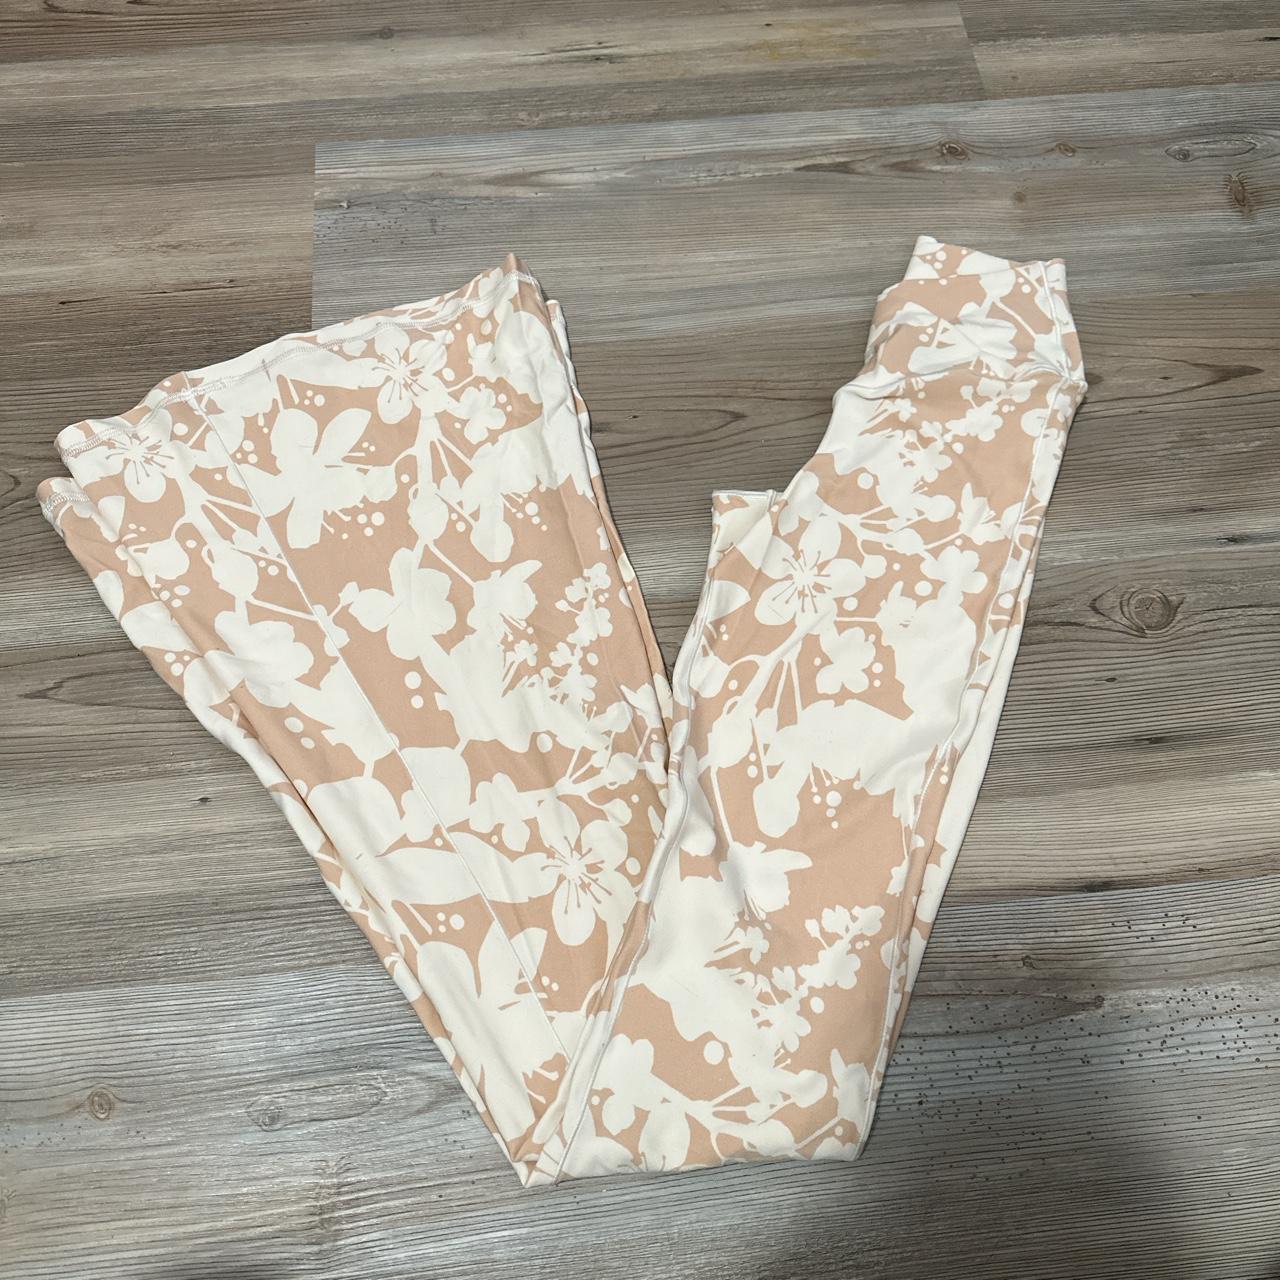 Cream colored leggings from aerie Never worn/size L - Depop